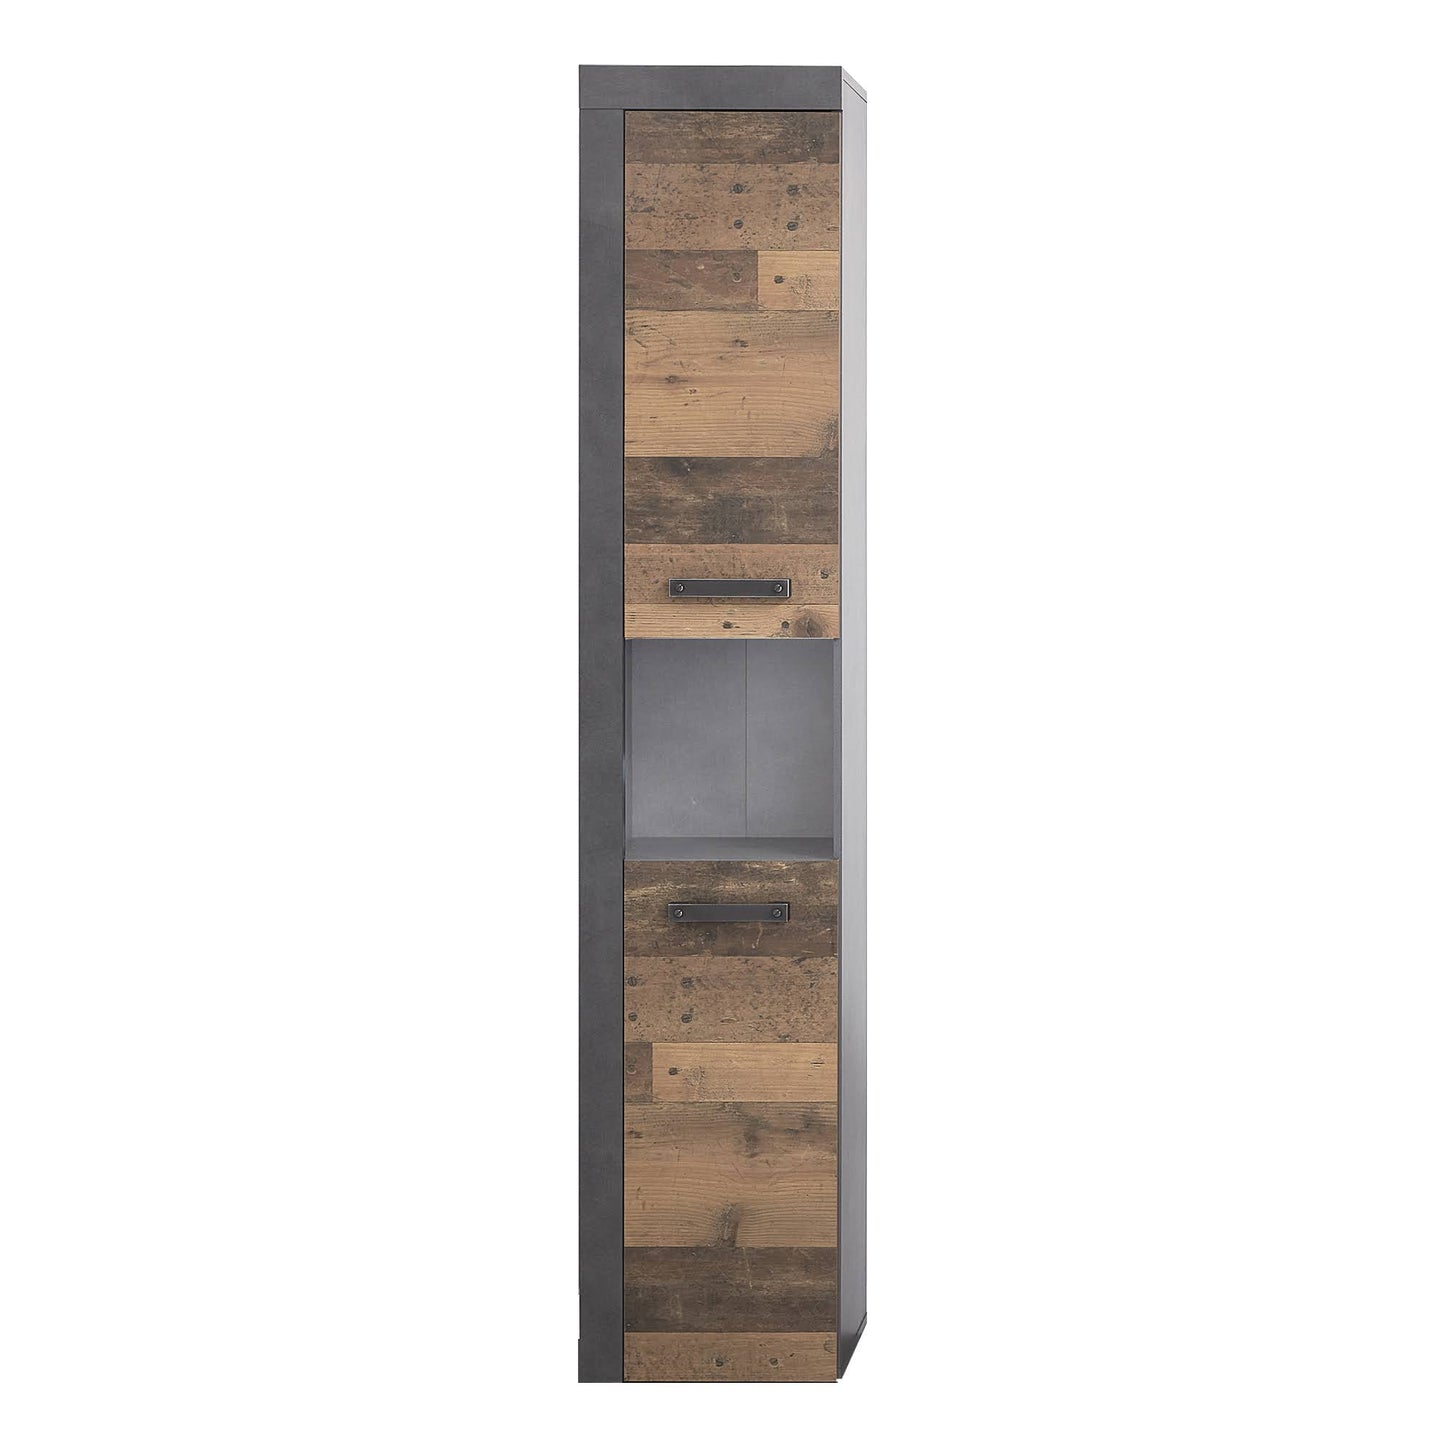 Nancy's Chicalote Bathroom Cabinet - Storage Cabinet - Brown and Gray - 33 x 184 x 31 cm